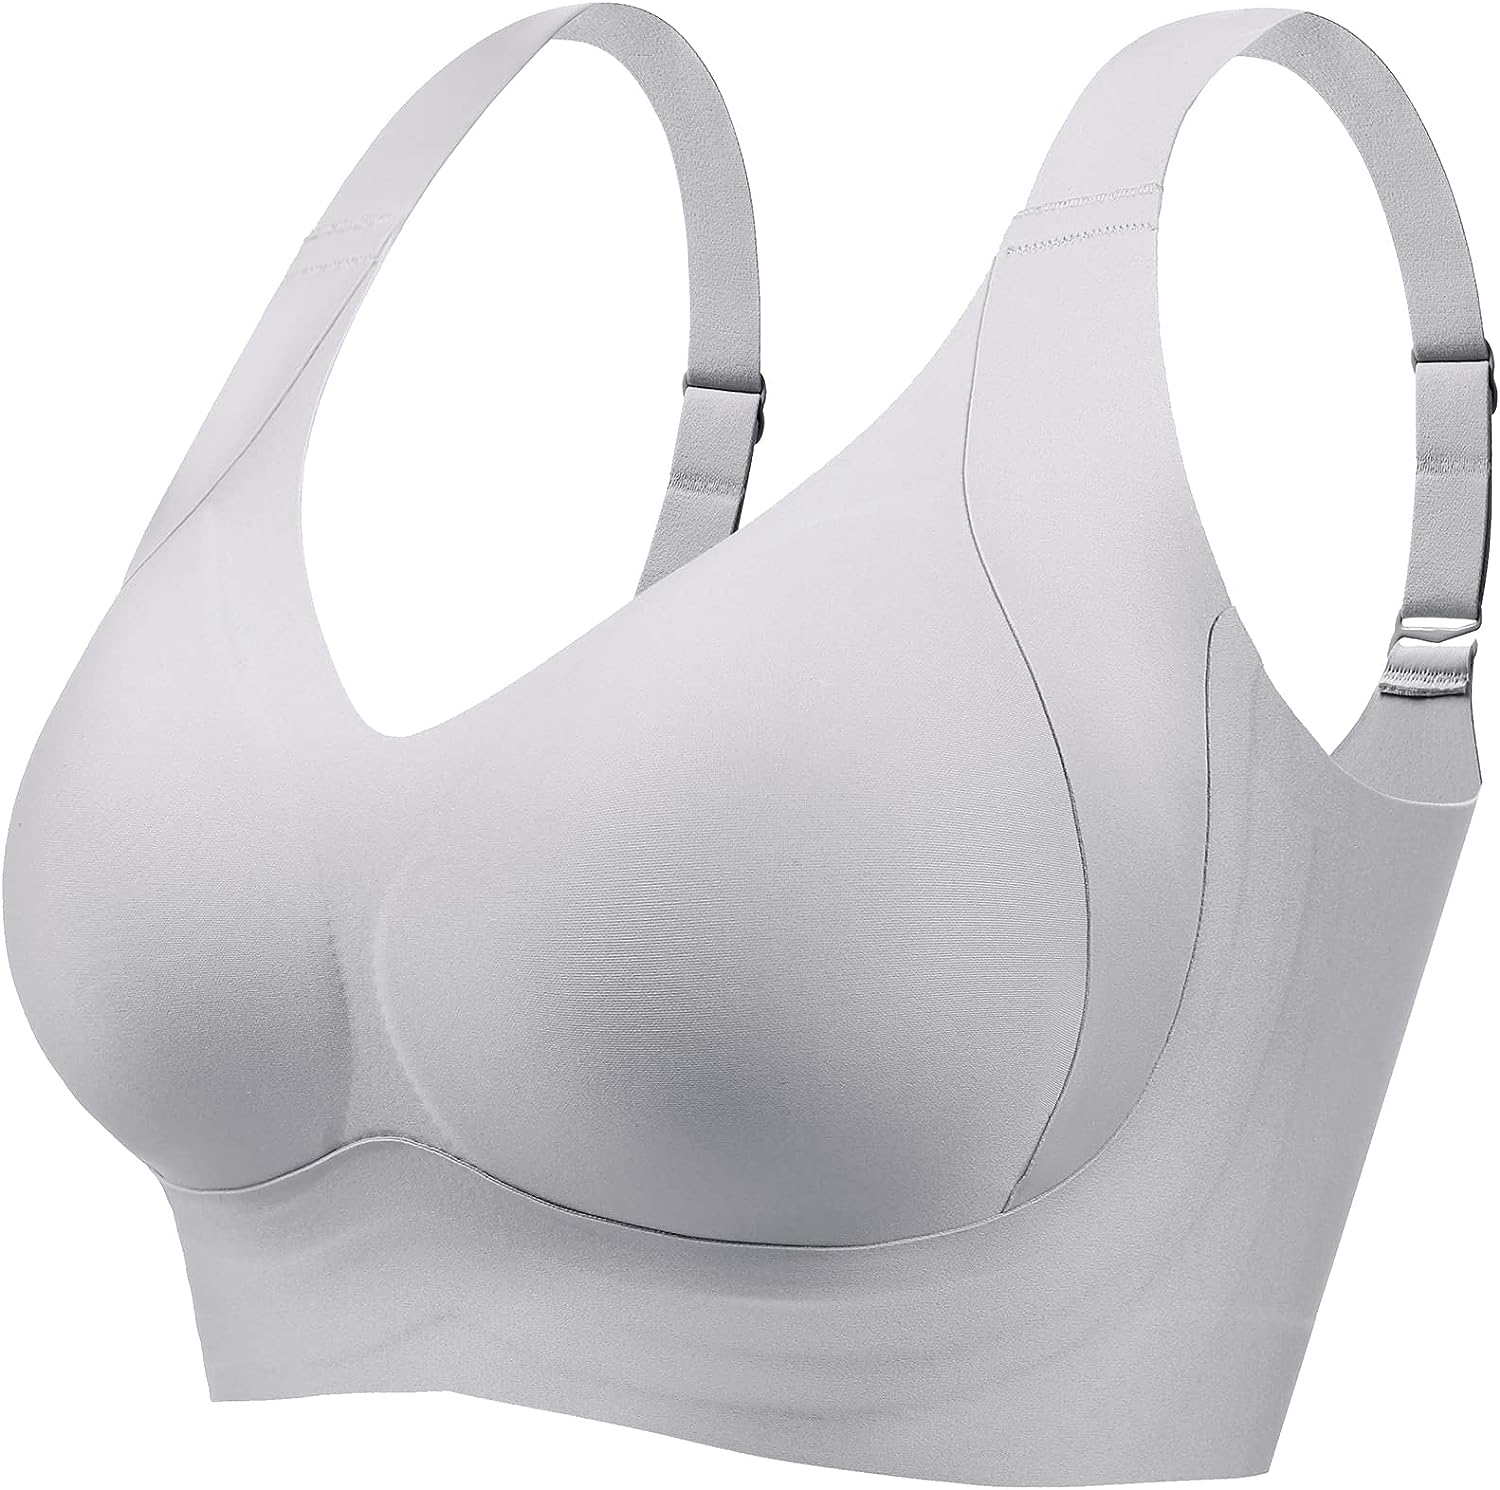 Poloution Daily Comfort Wireless Shaper Bra,Pollution Bra,Pollution